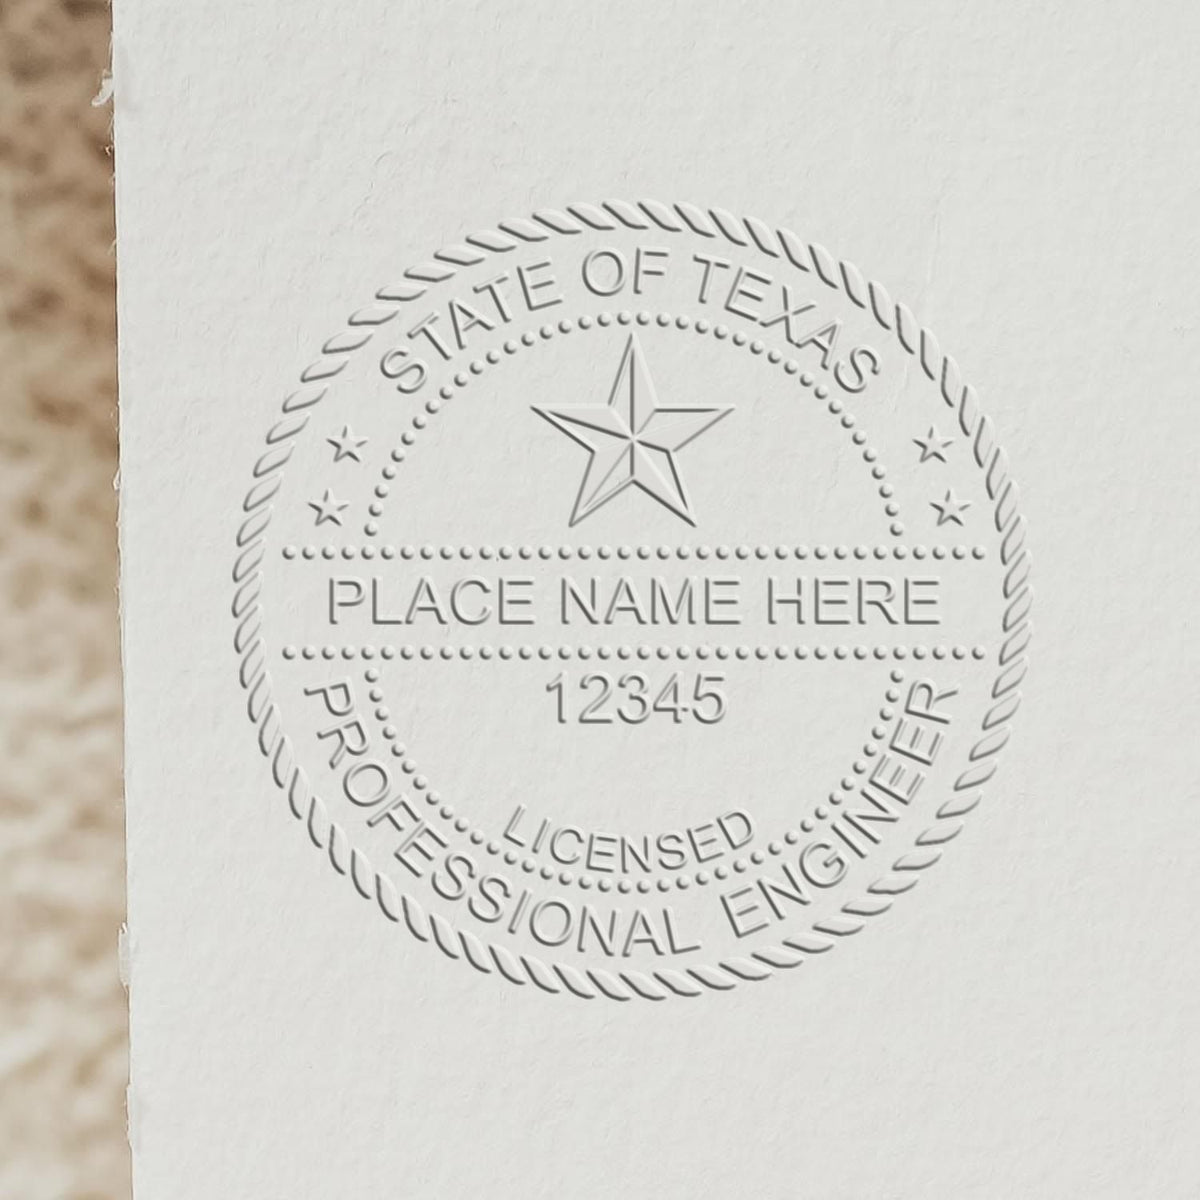 A photograph of the Soft Texas Professional Engineer Seal stamp impression reveals a vivid, professional image of the on paper.